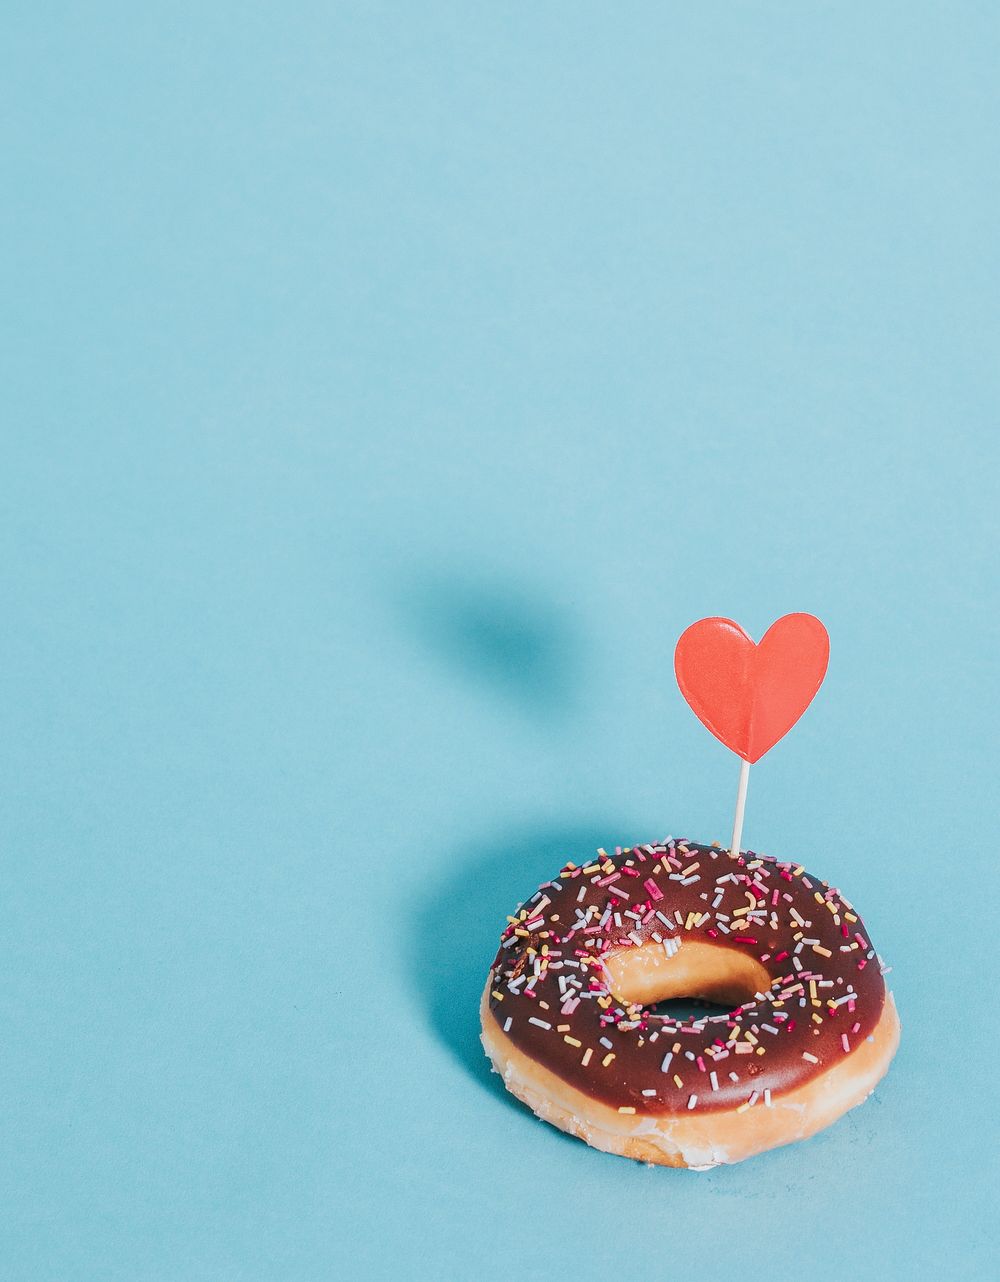 Tasty glazed donut decorated with a heart